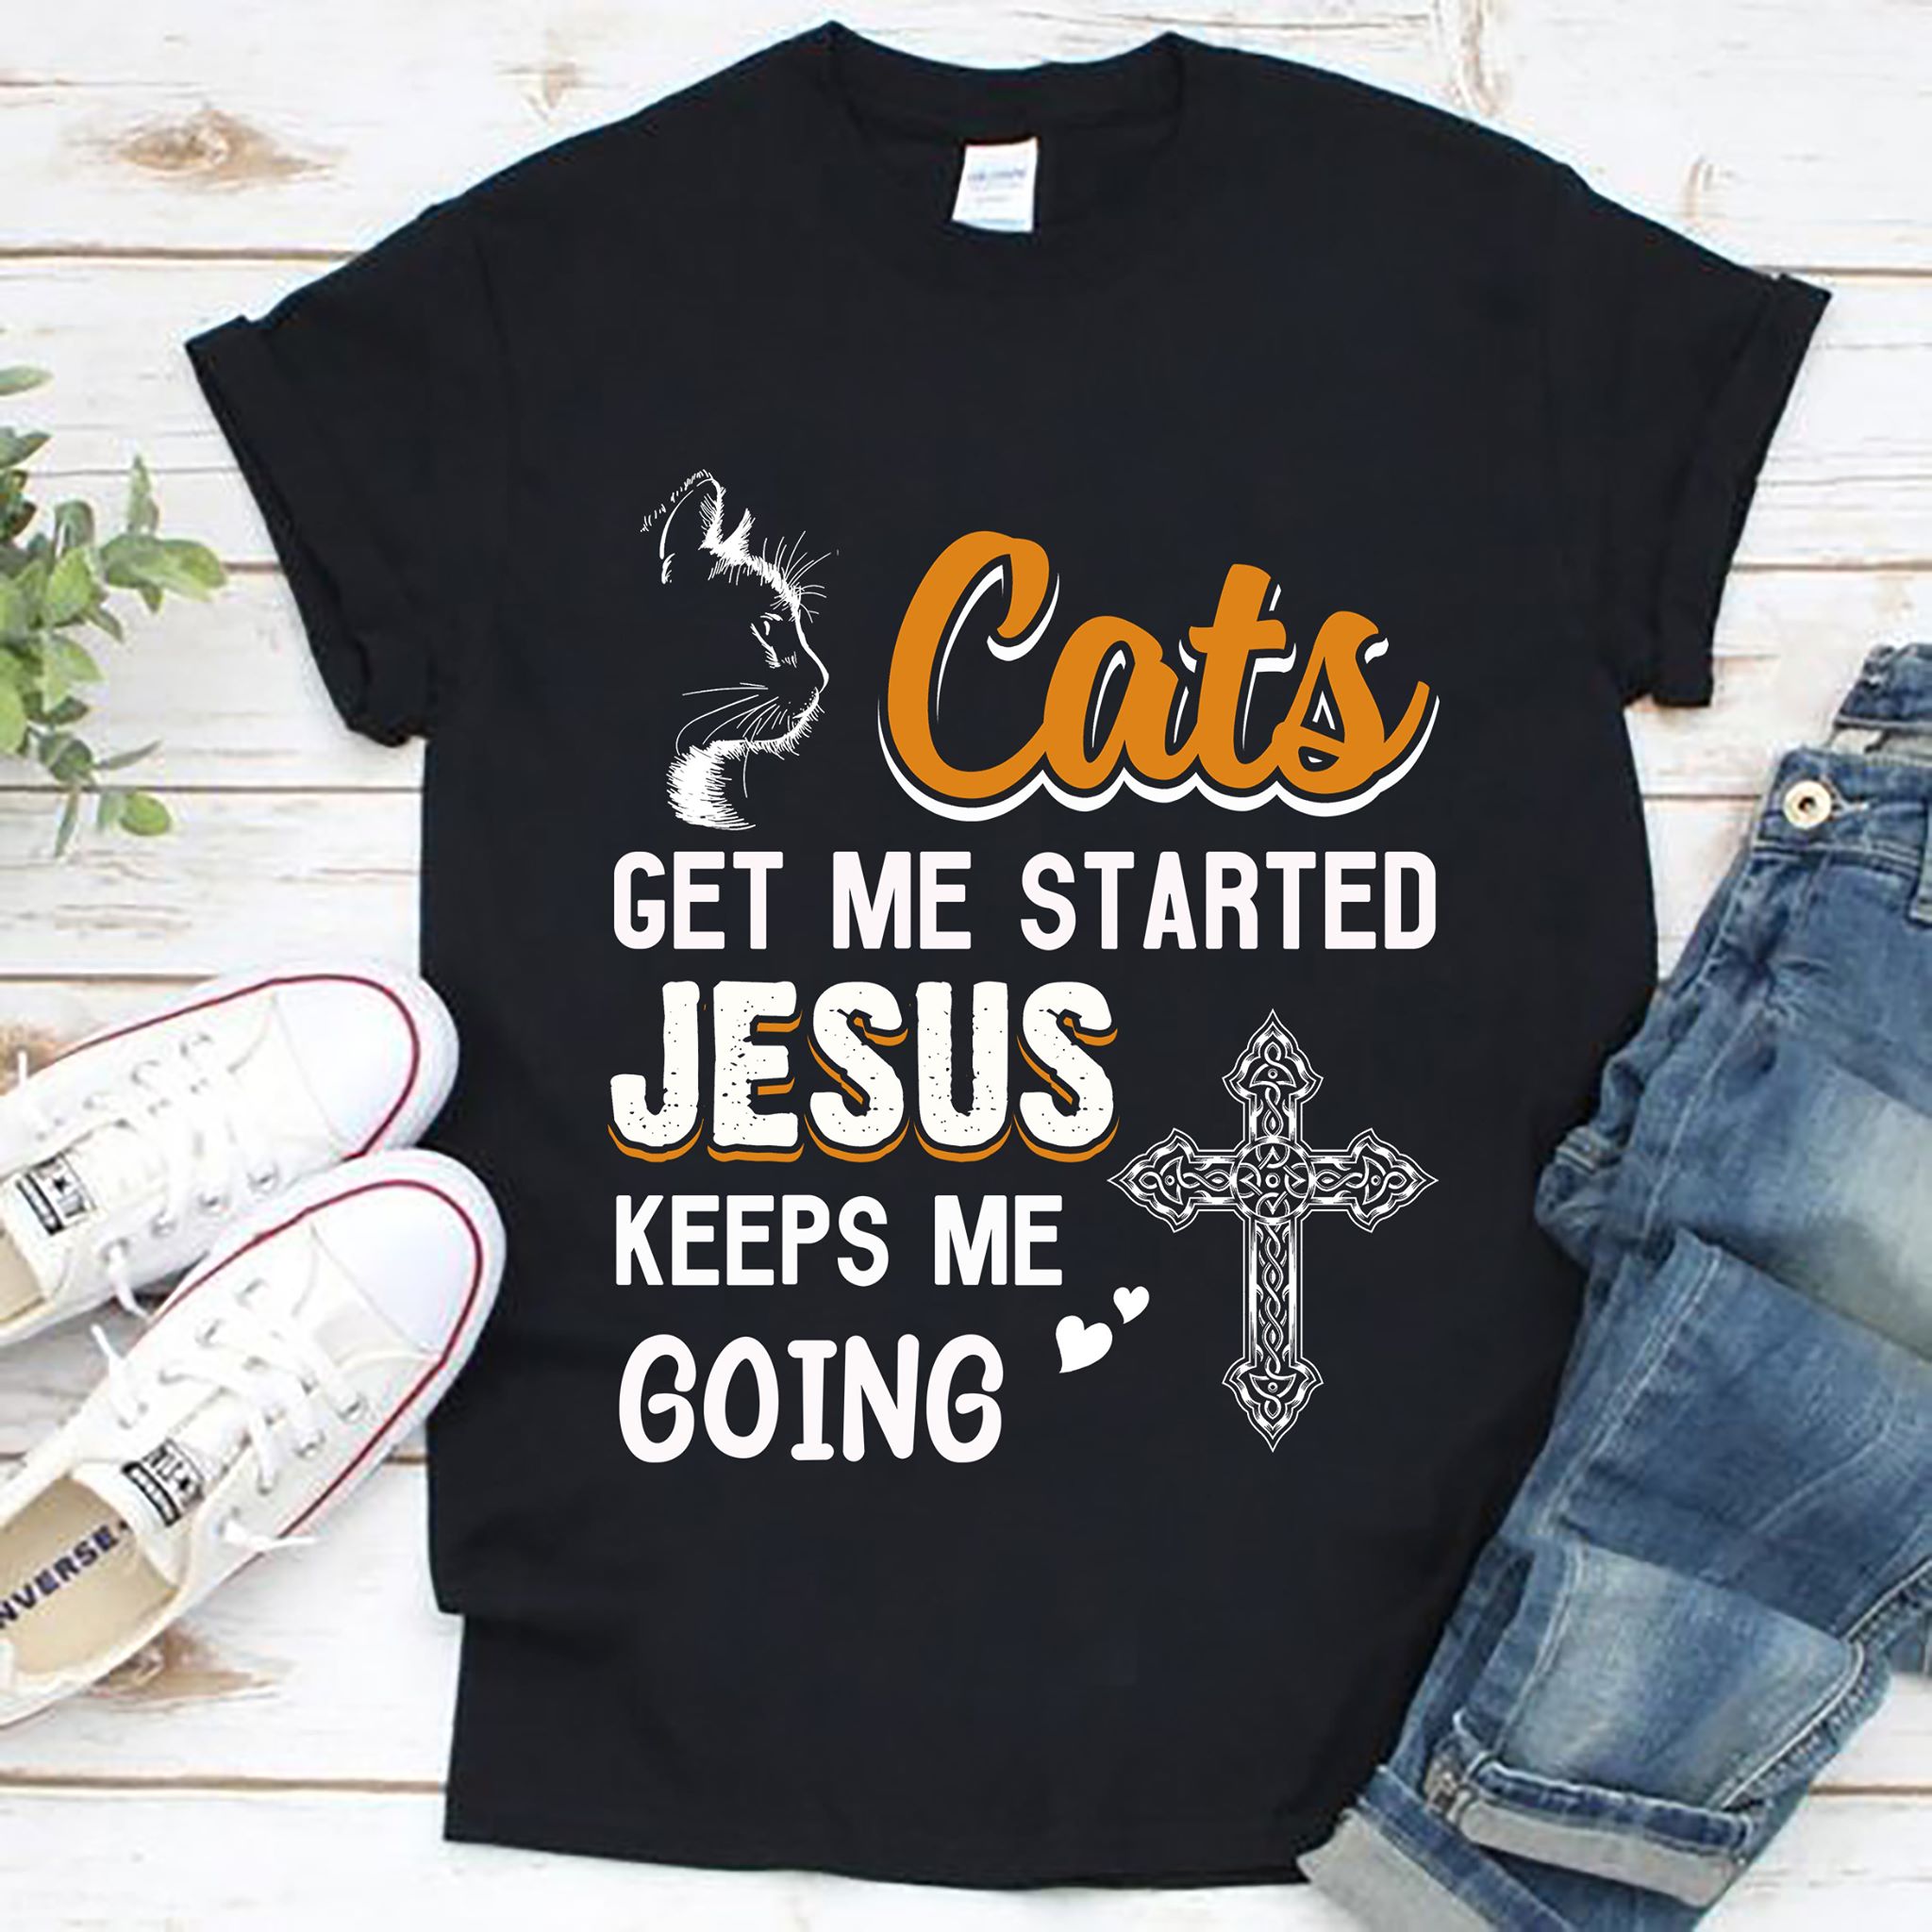 Cats get me started Jesus keeps me going - Cat and Jesus, cat lover